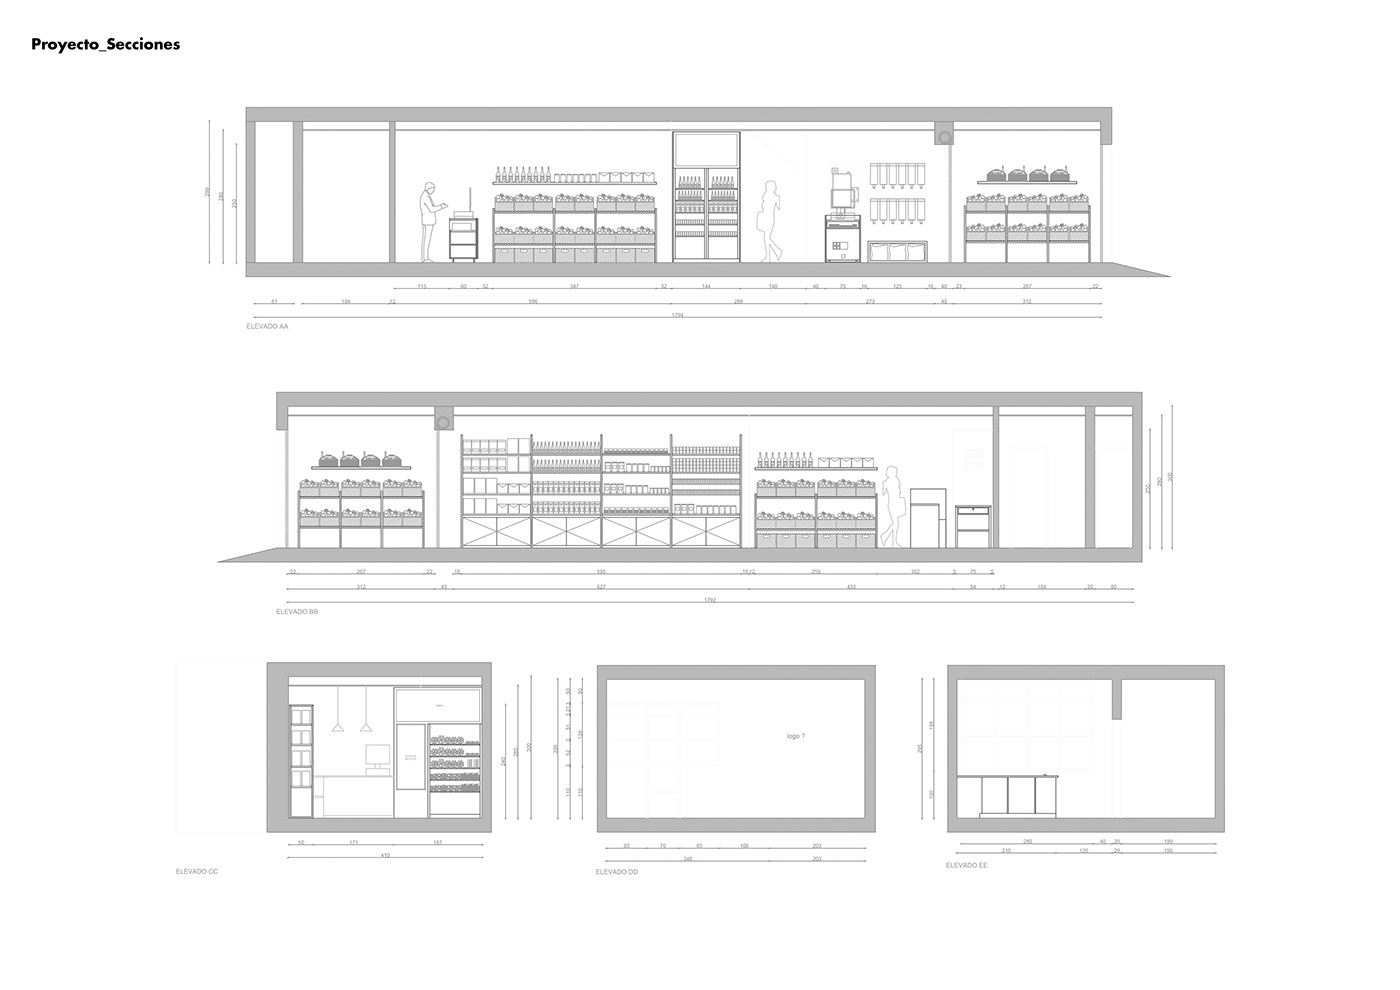 Grocery store interiordesign AutoCAD architecture 3ds max projectgrocery